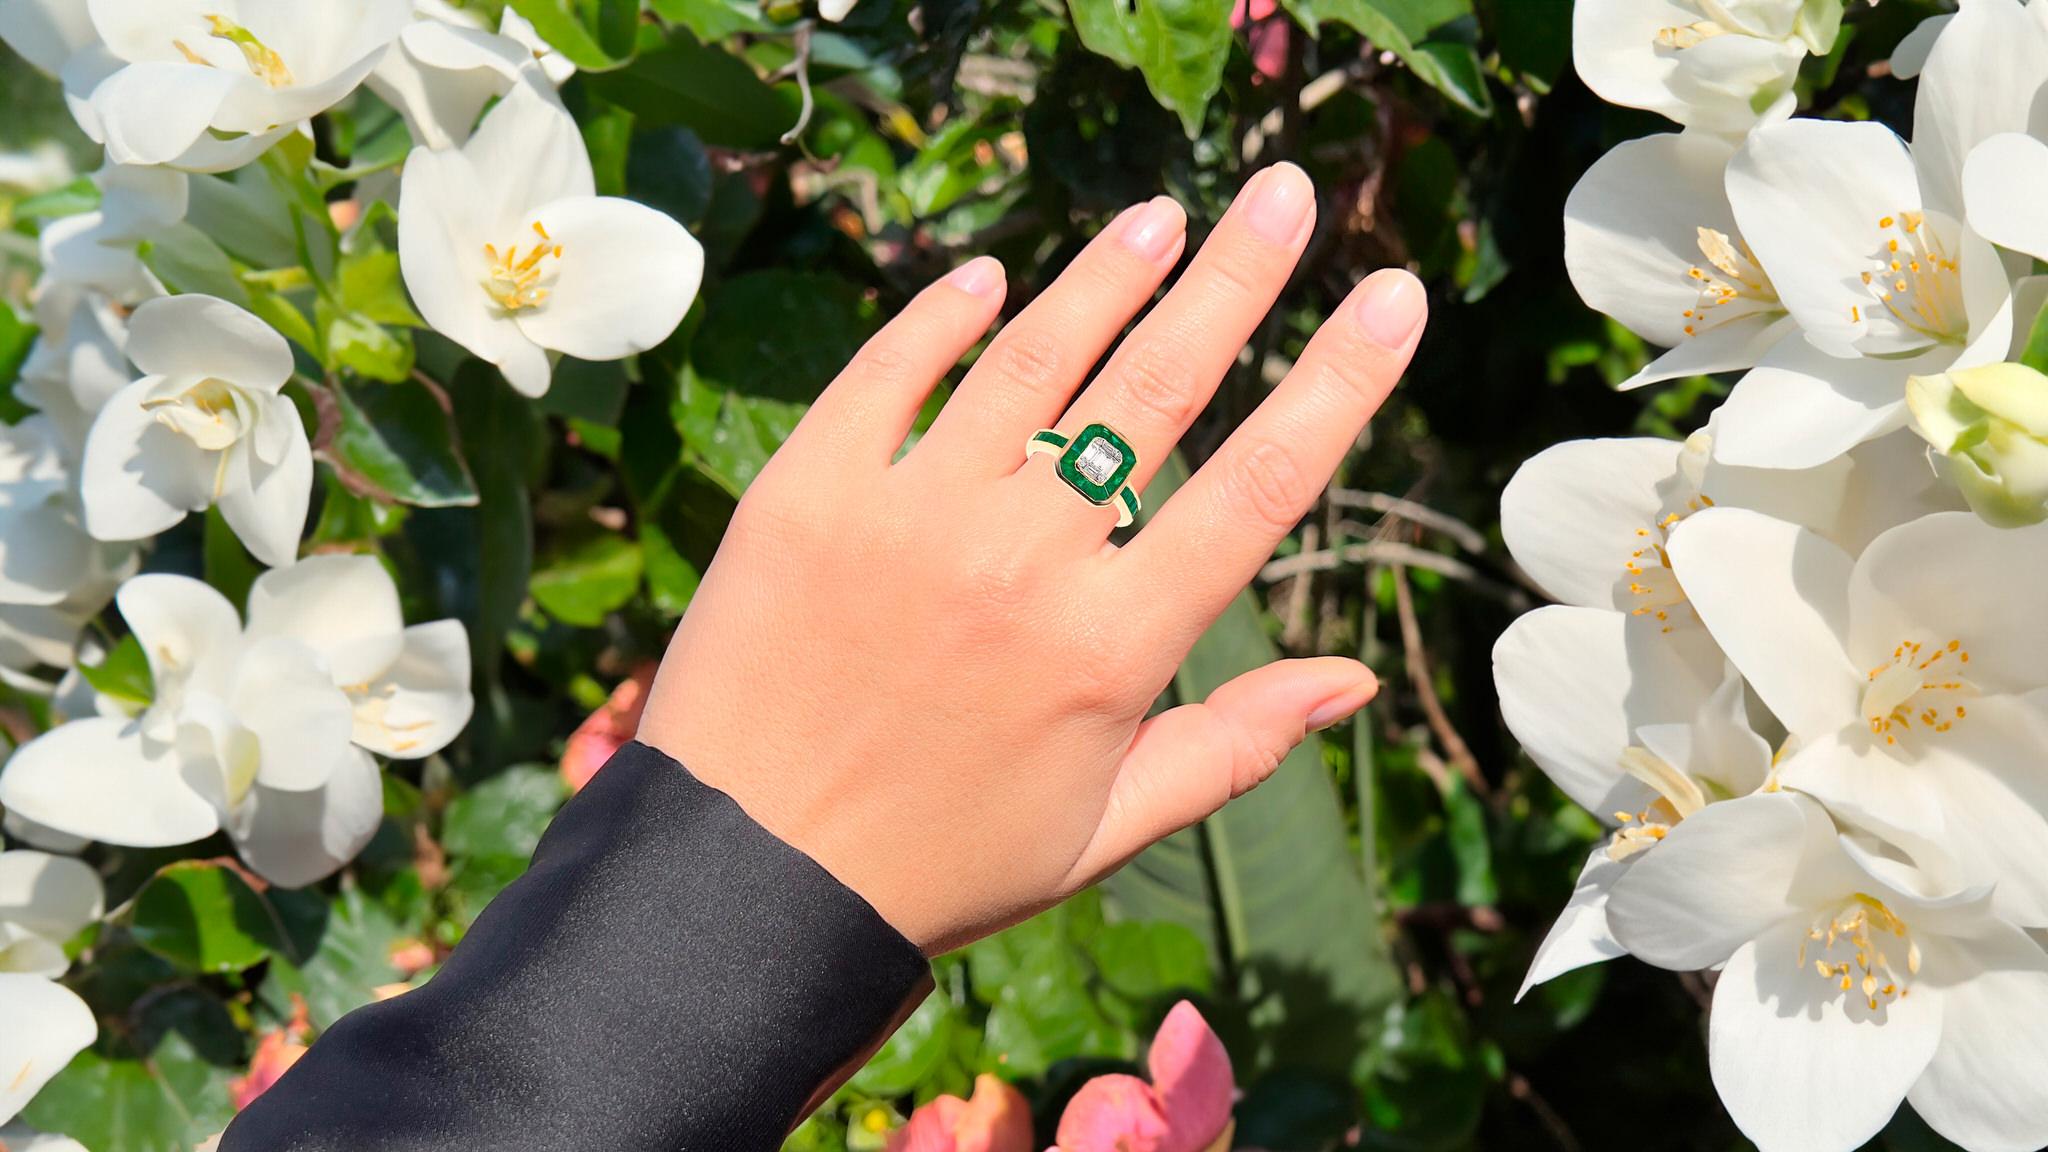 It comes with the Gemological Appraisal by GIA GG/AJP
All Gemstones are Natural
24 Emeralds = 1.64 Carats
10 Diamonds = 0.21 Carats
Metal: 18K Yellow Gold
Ring Size: 6.5* US
*It can be resized complimentary